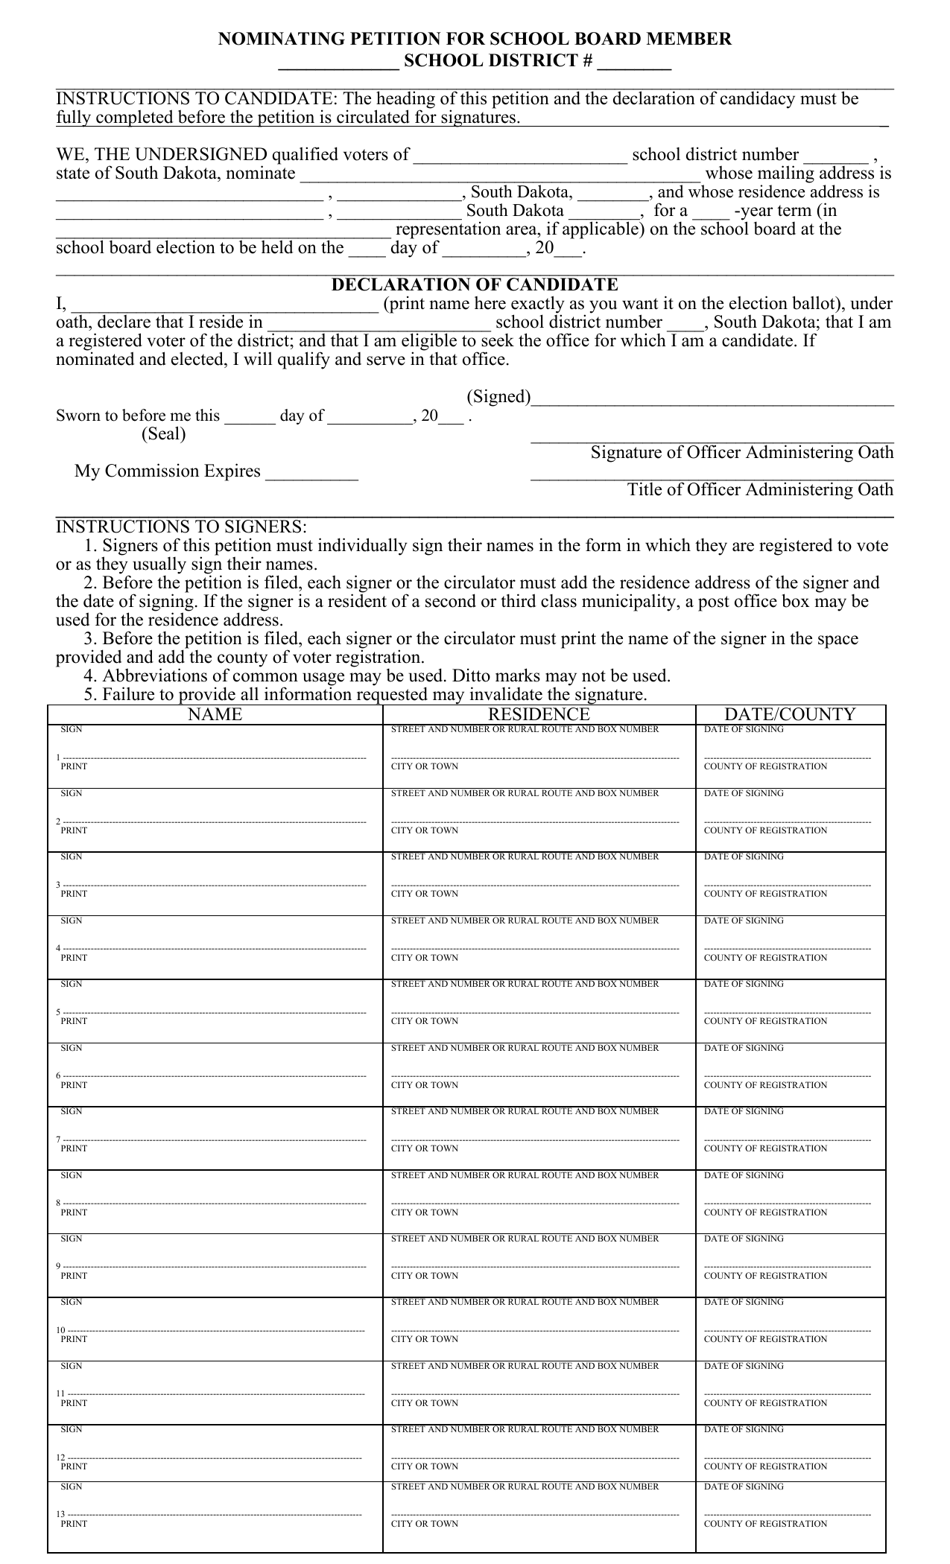 Nominating Petition for School Board Member - South Dakota, Page 1